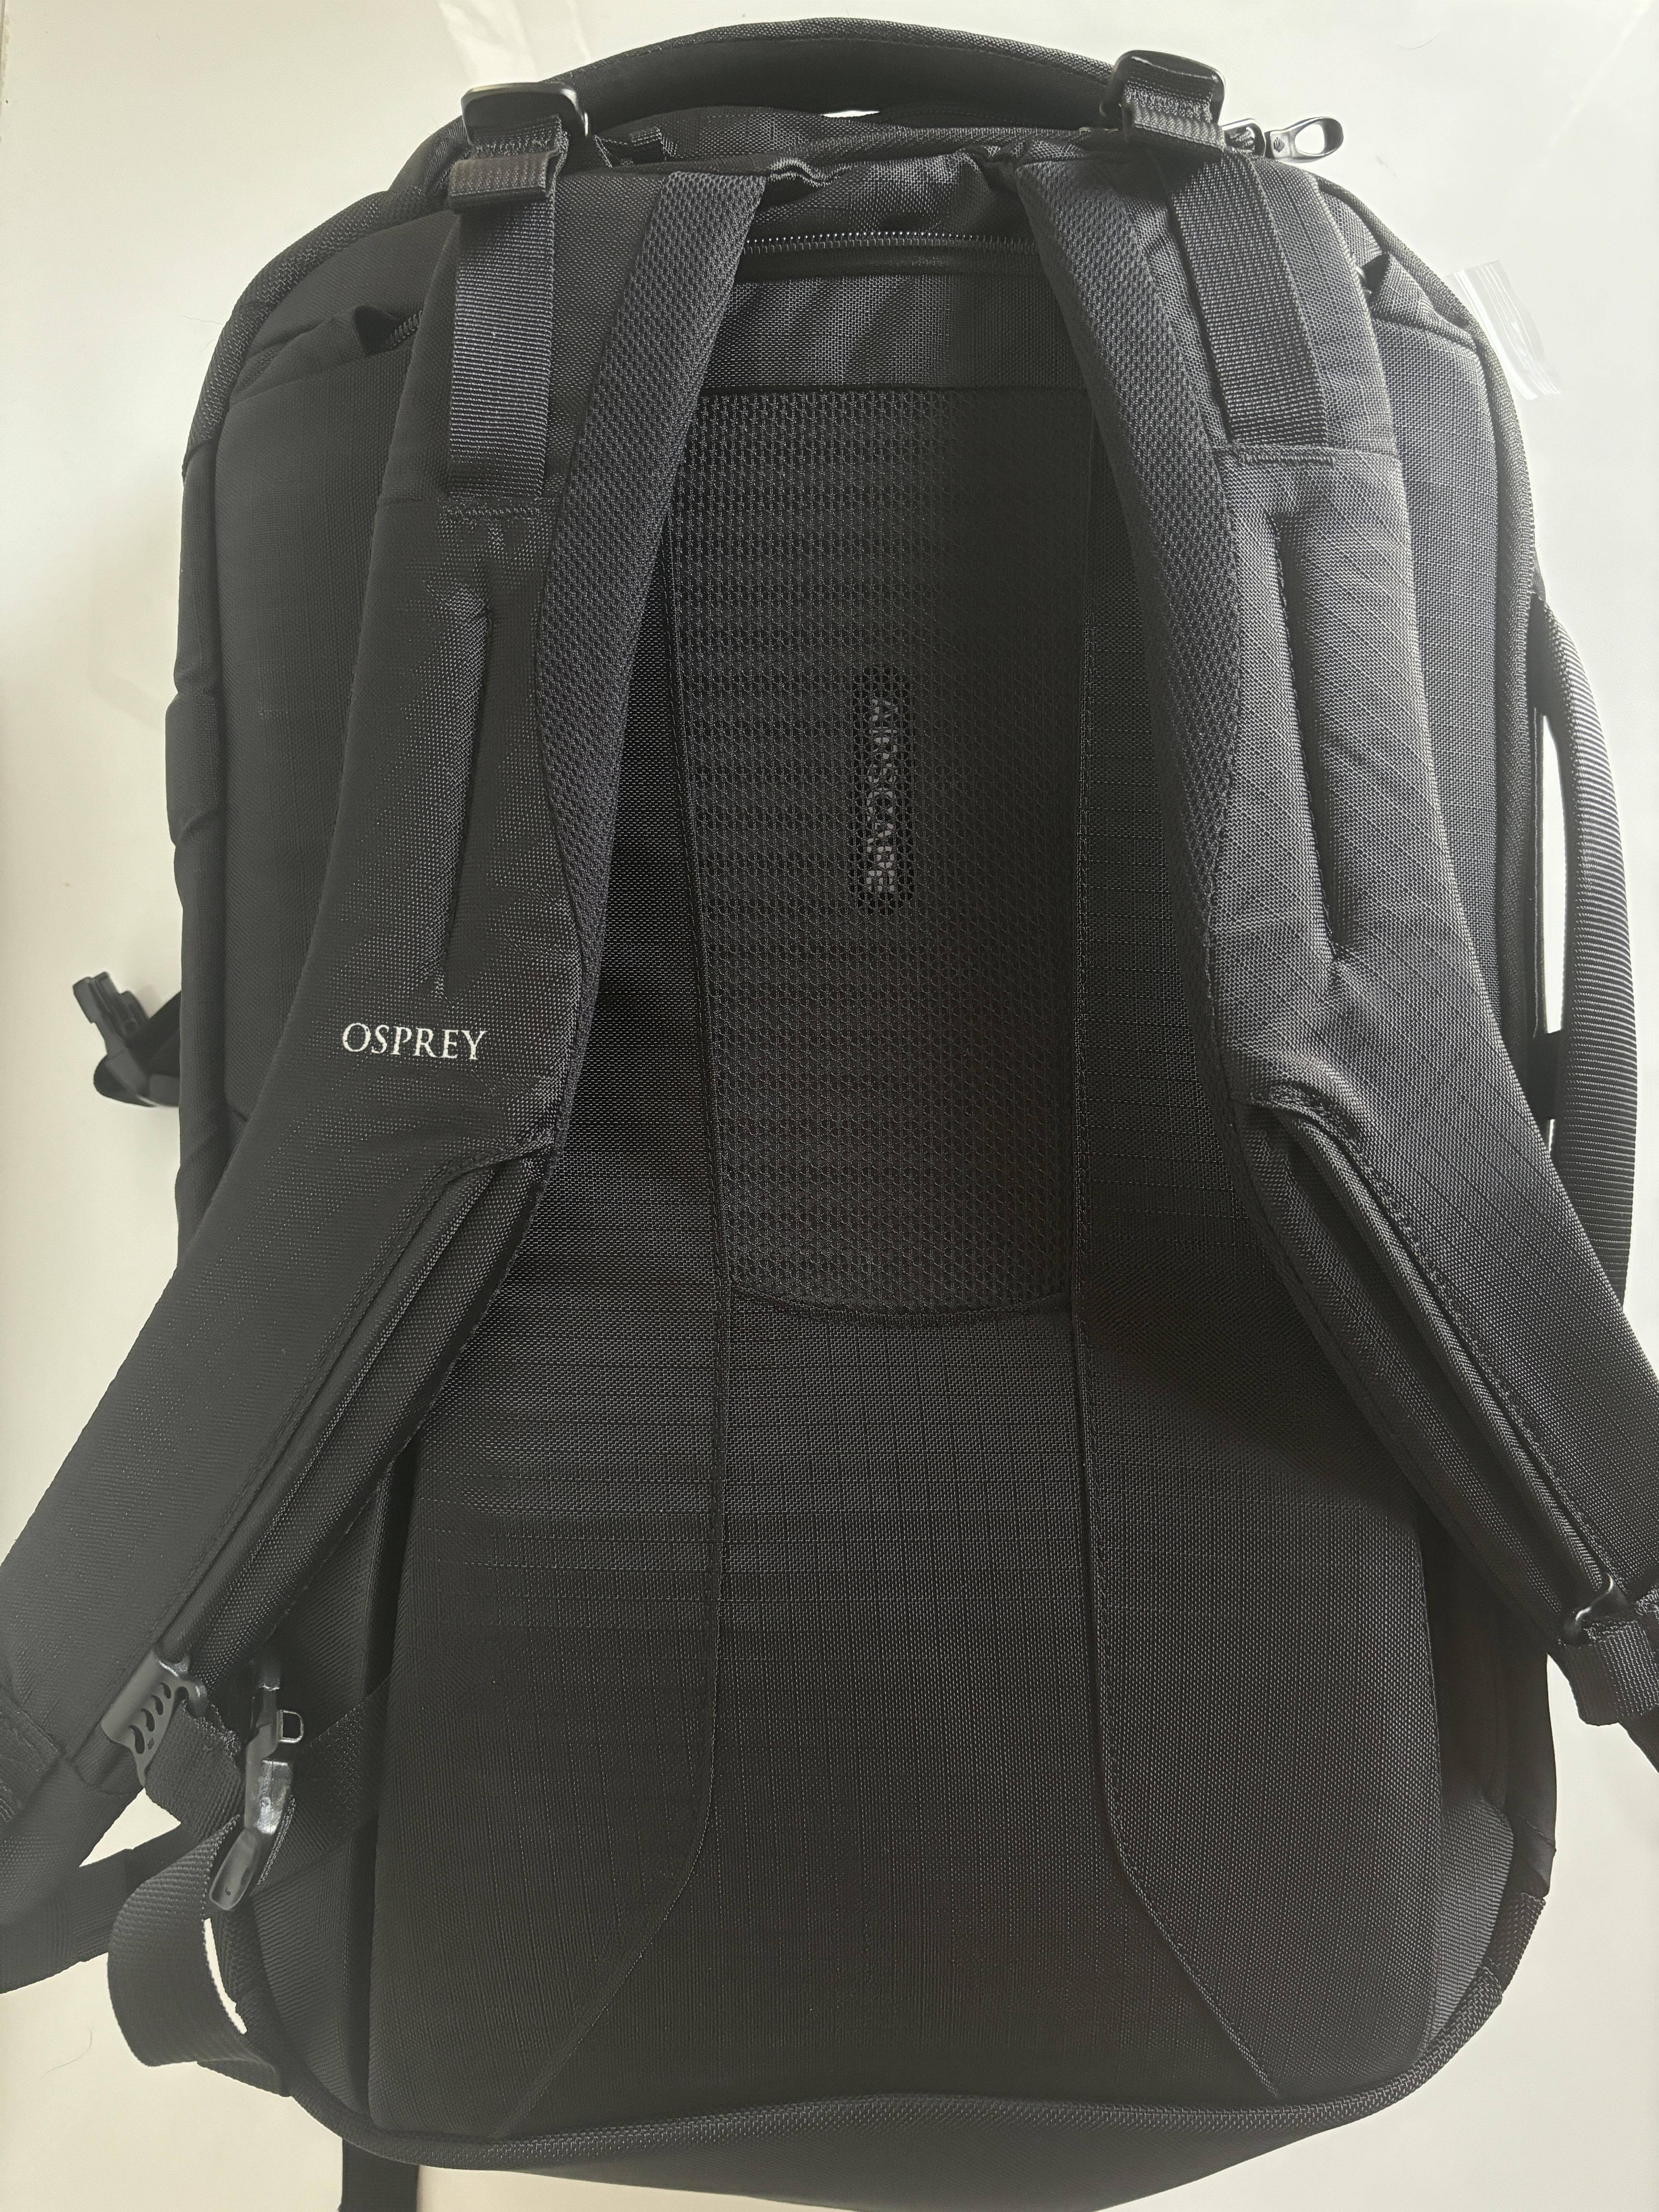 Osprey Airscape Harness System